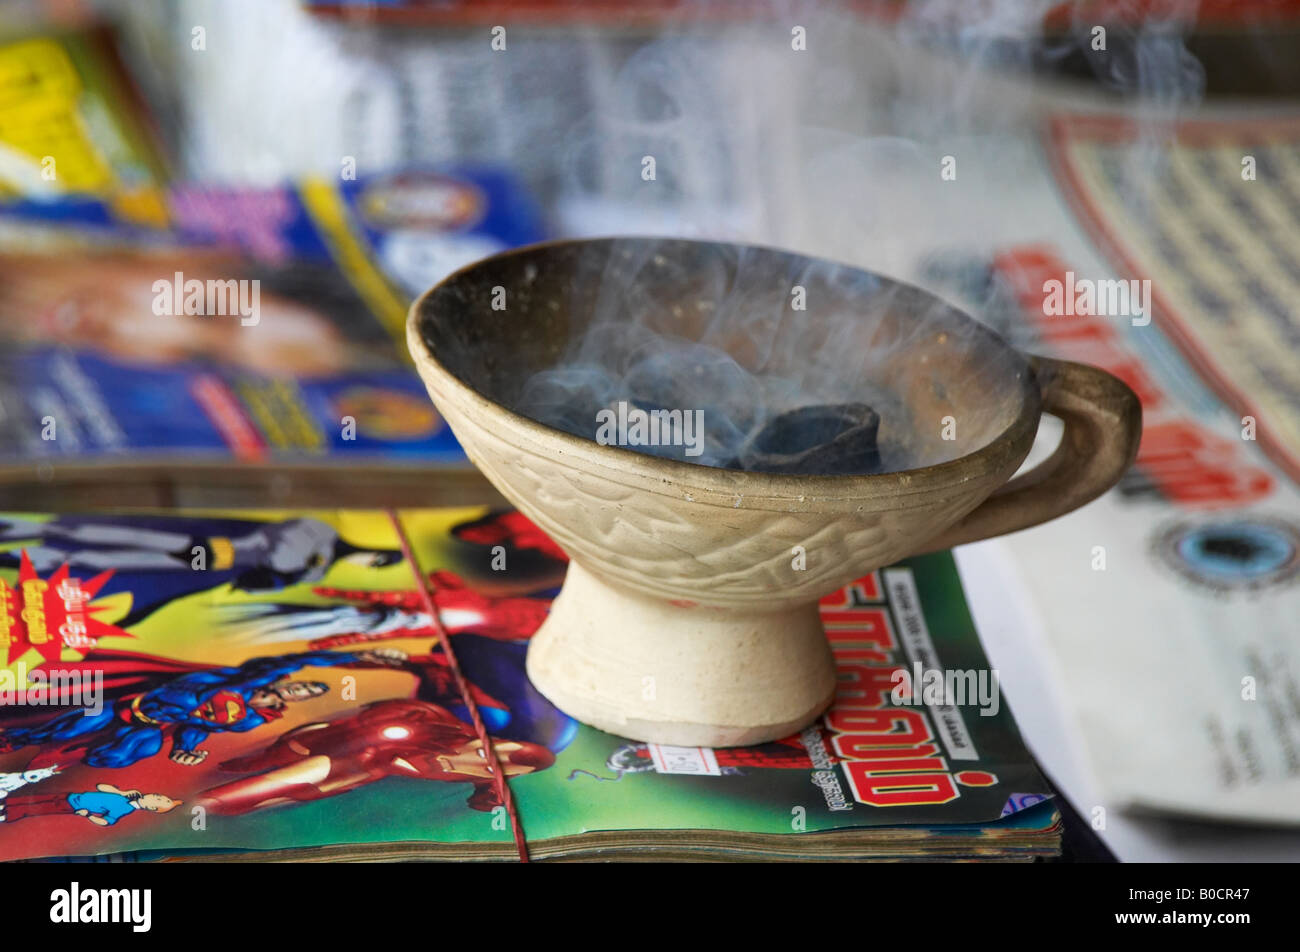 Incense burner at a sidewalk magazine stall in Little India, Singapore Stock Photo